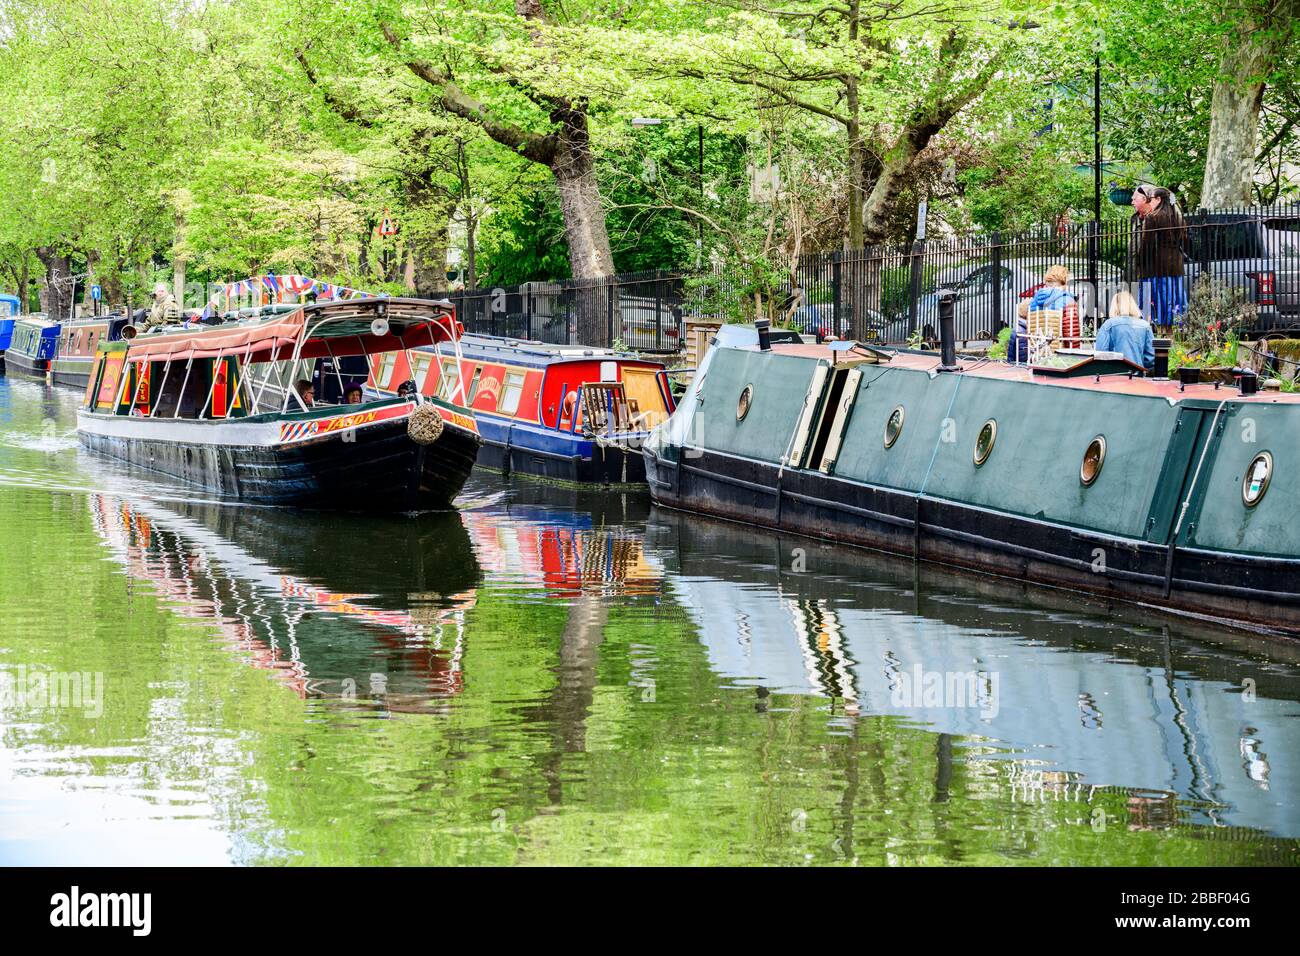 A narrow boat (canal boat) goes up the River Thames in Little Venice in London, England. Stock Photo